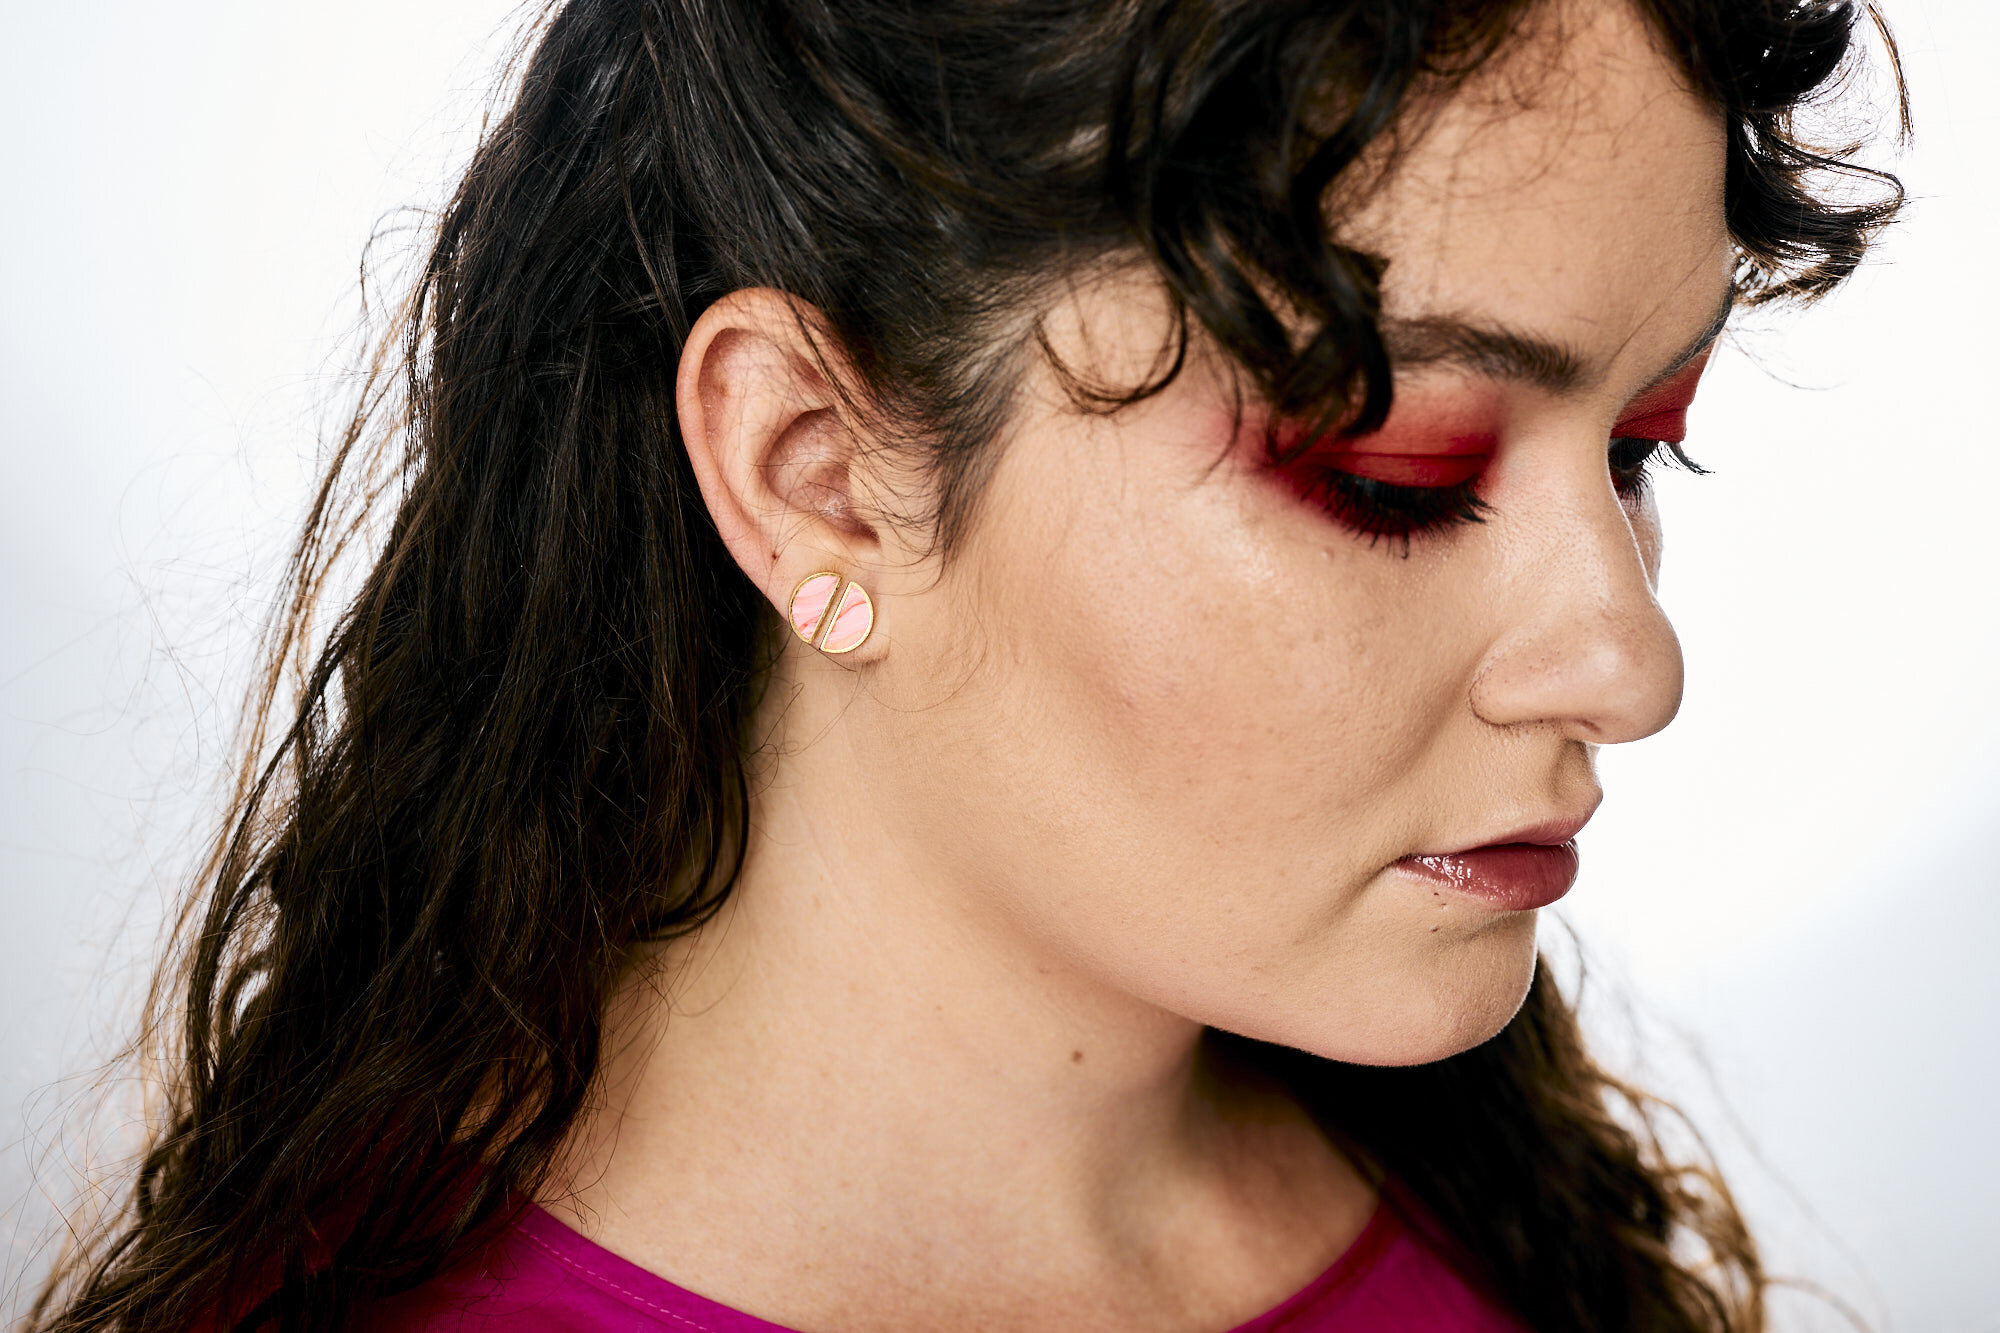 A model with dark curly hair and dramatic red eyeshadow wears the rose quartz half moon geo studs stacked together